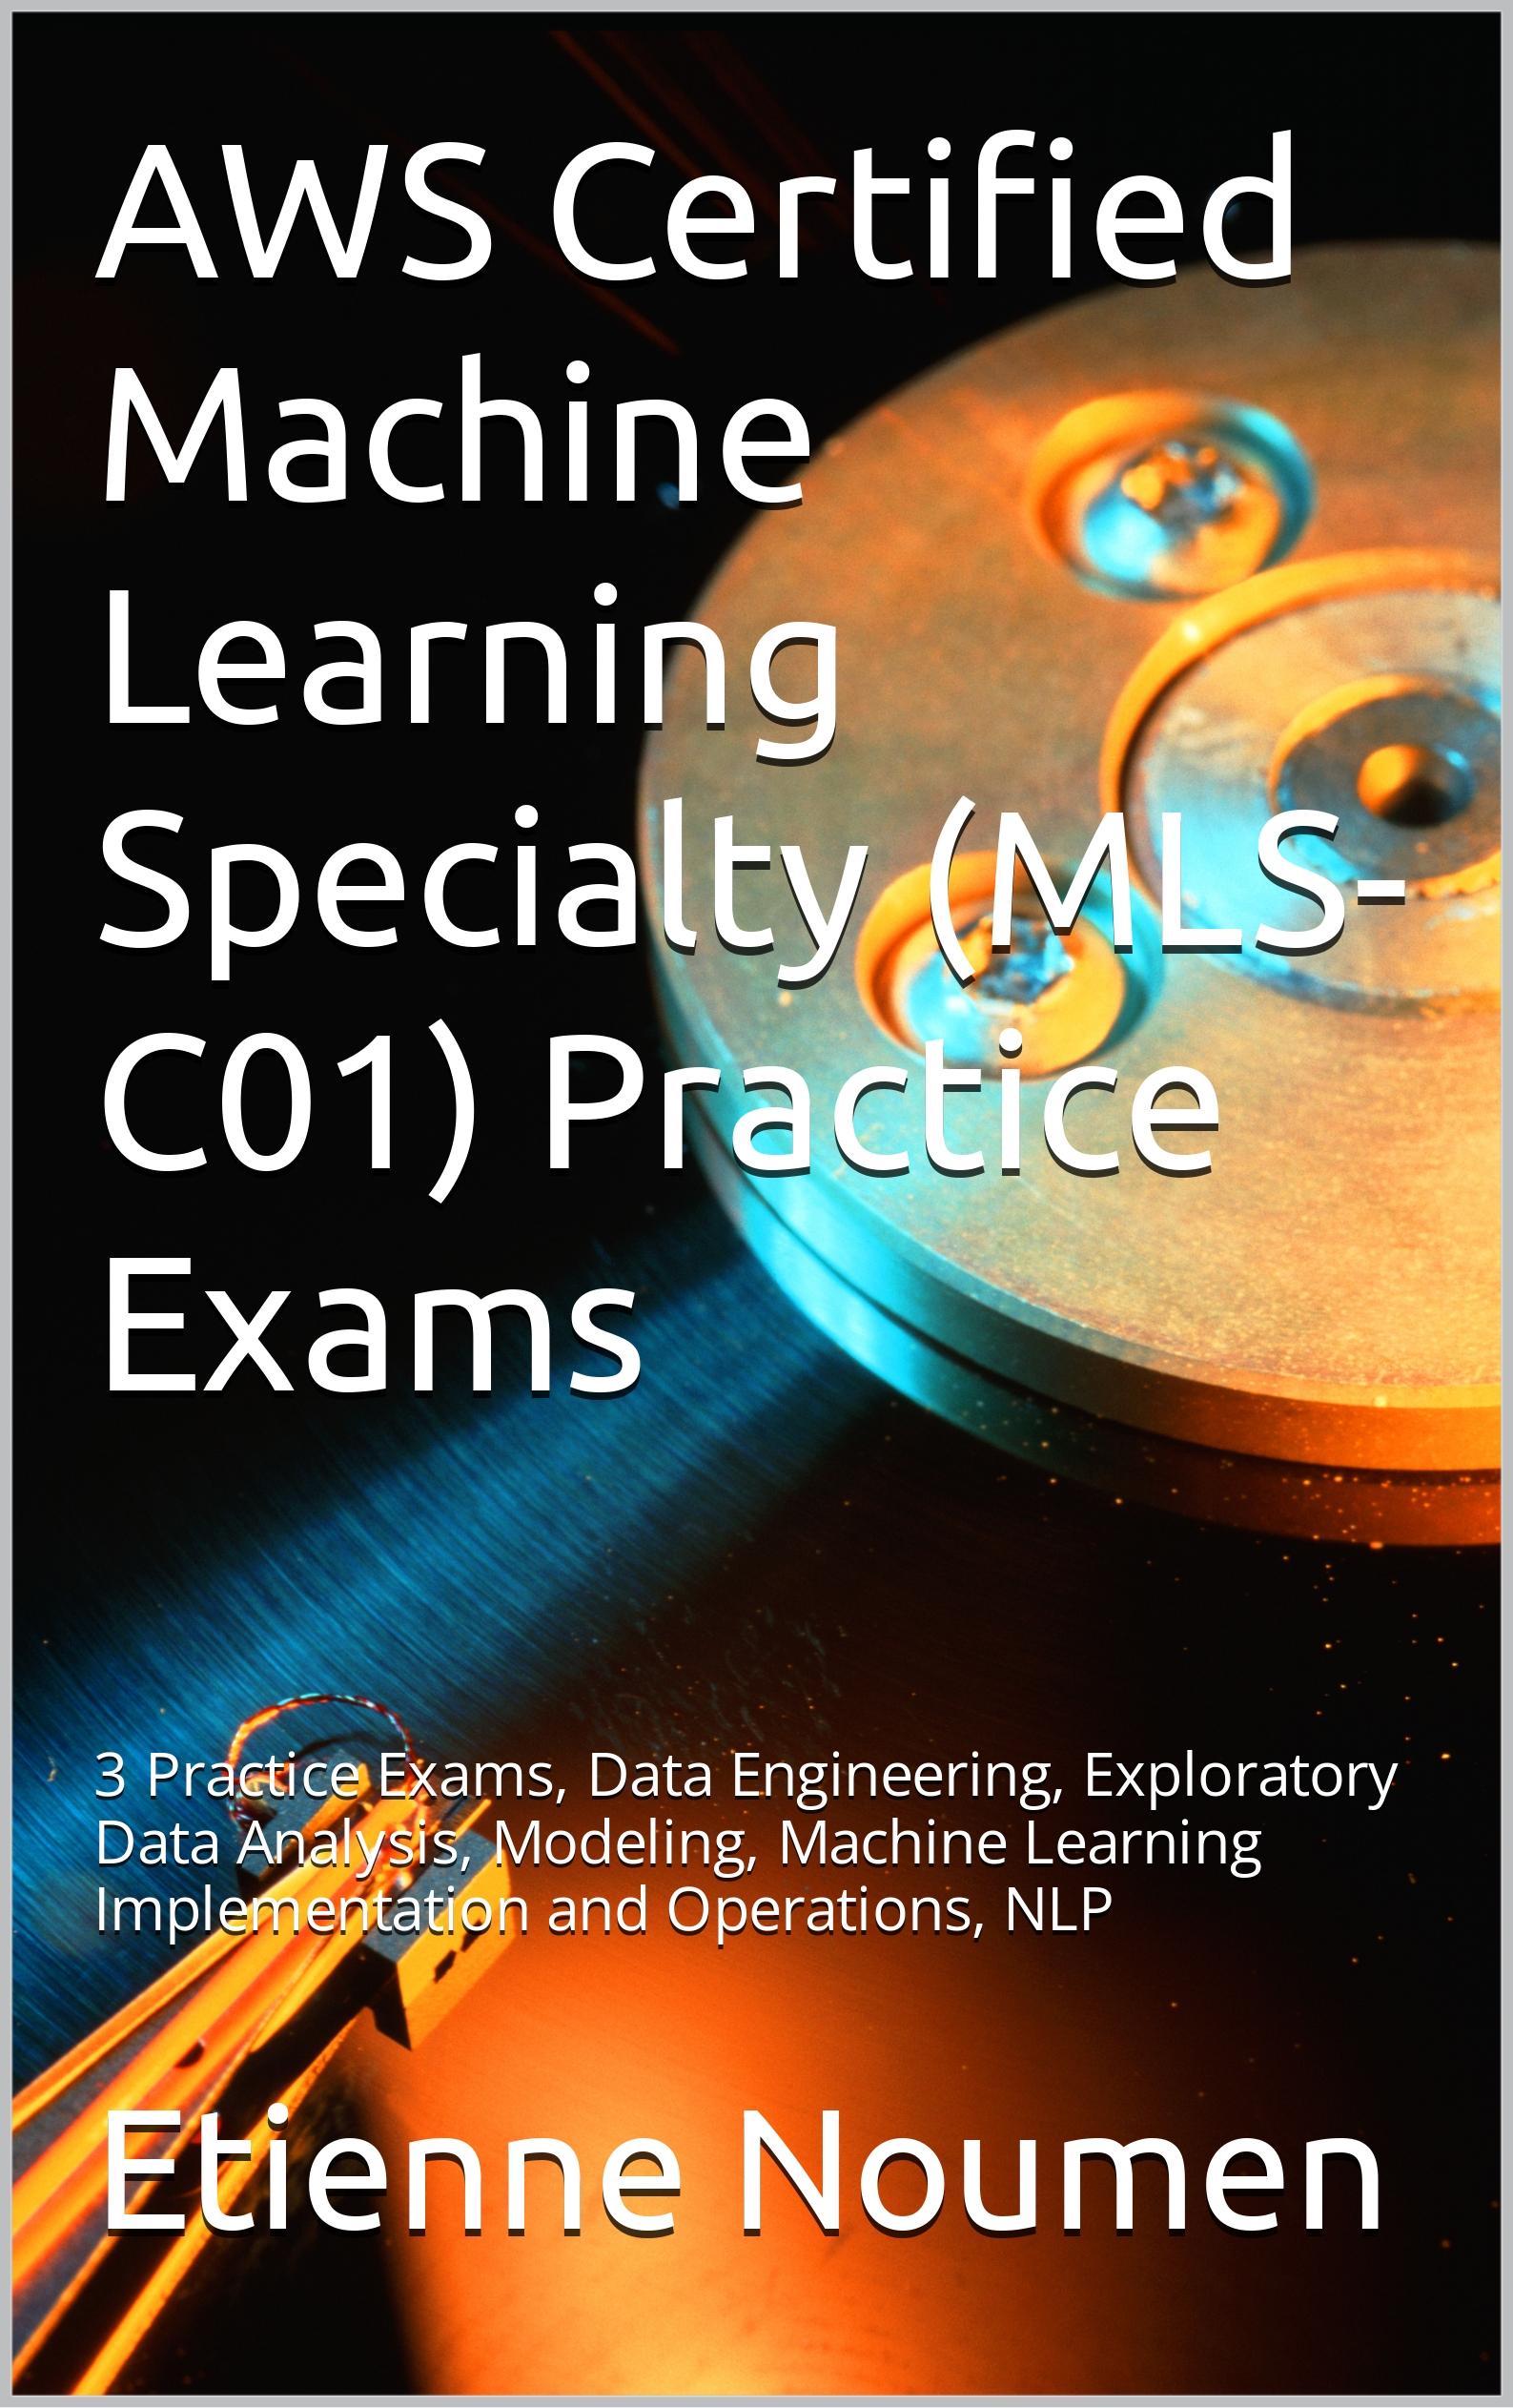 2023 AWS Certification Machine Learning Specialty (MLS-C01) Practice Exams